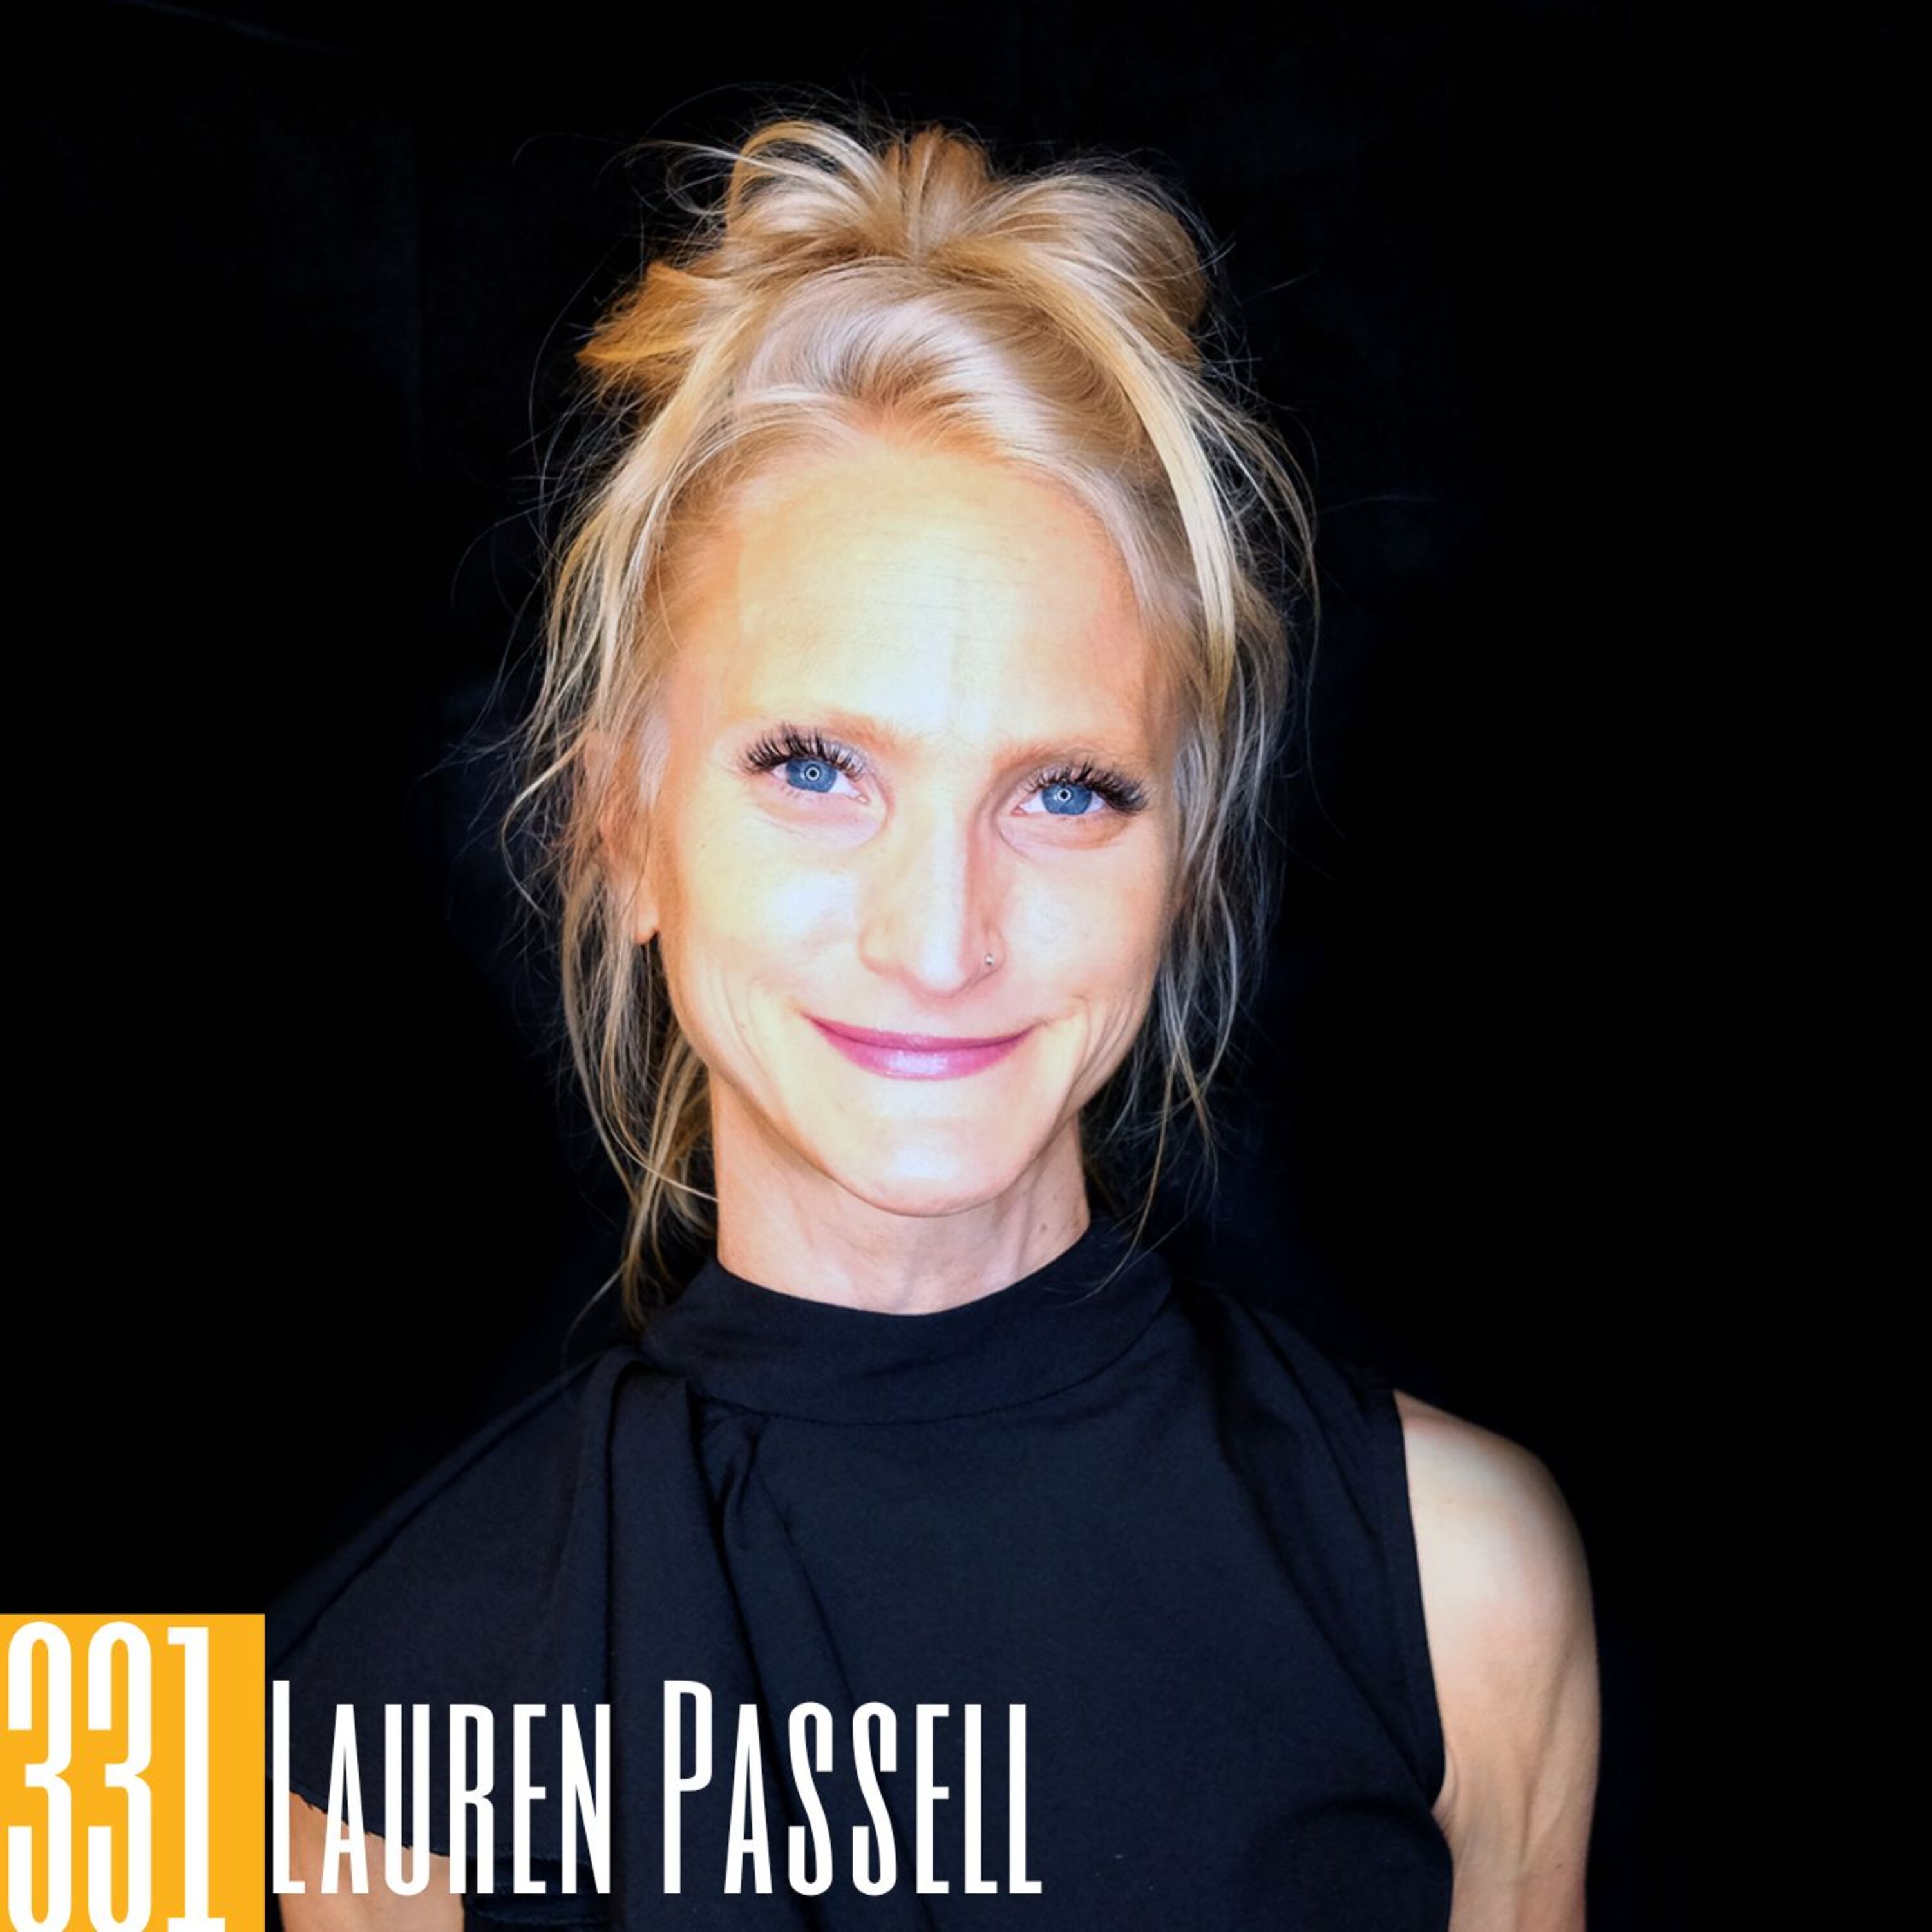 331 Lauren Passell - Exploring the Fascinating World of Podcasting